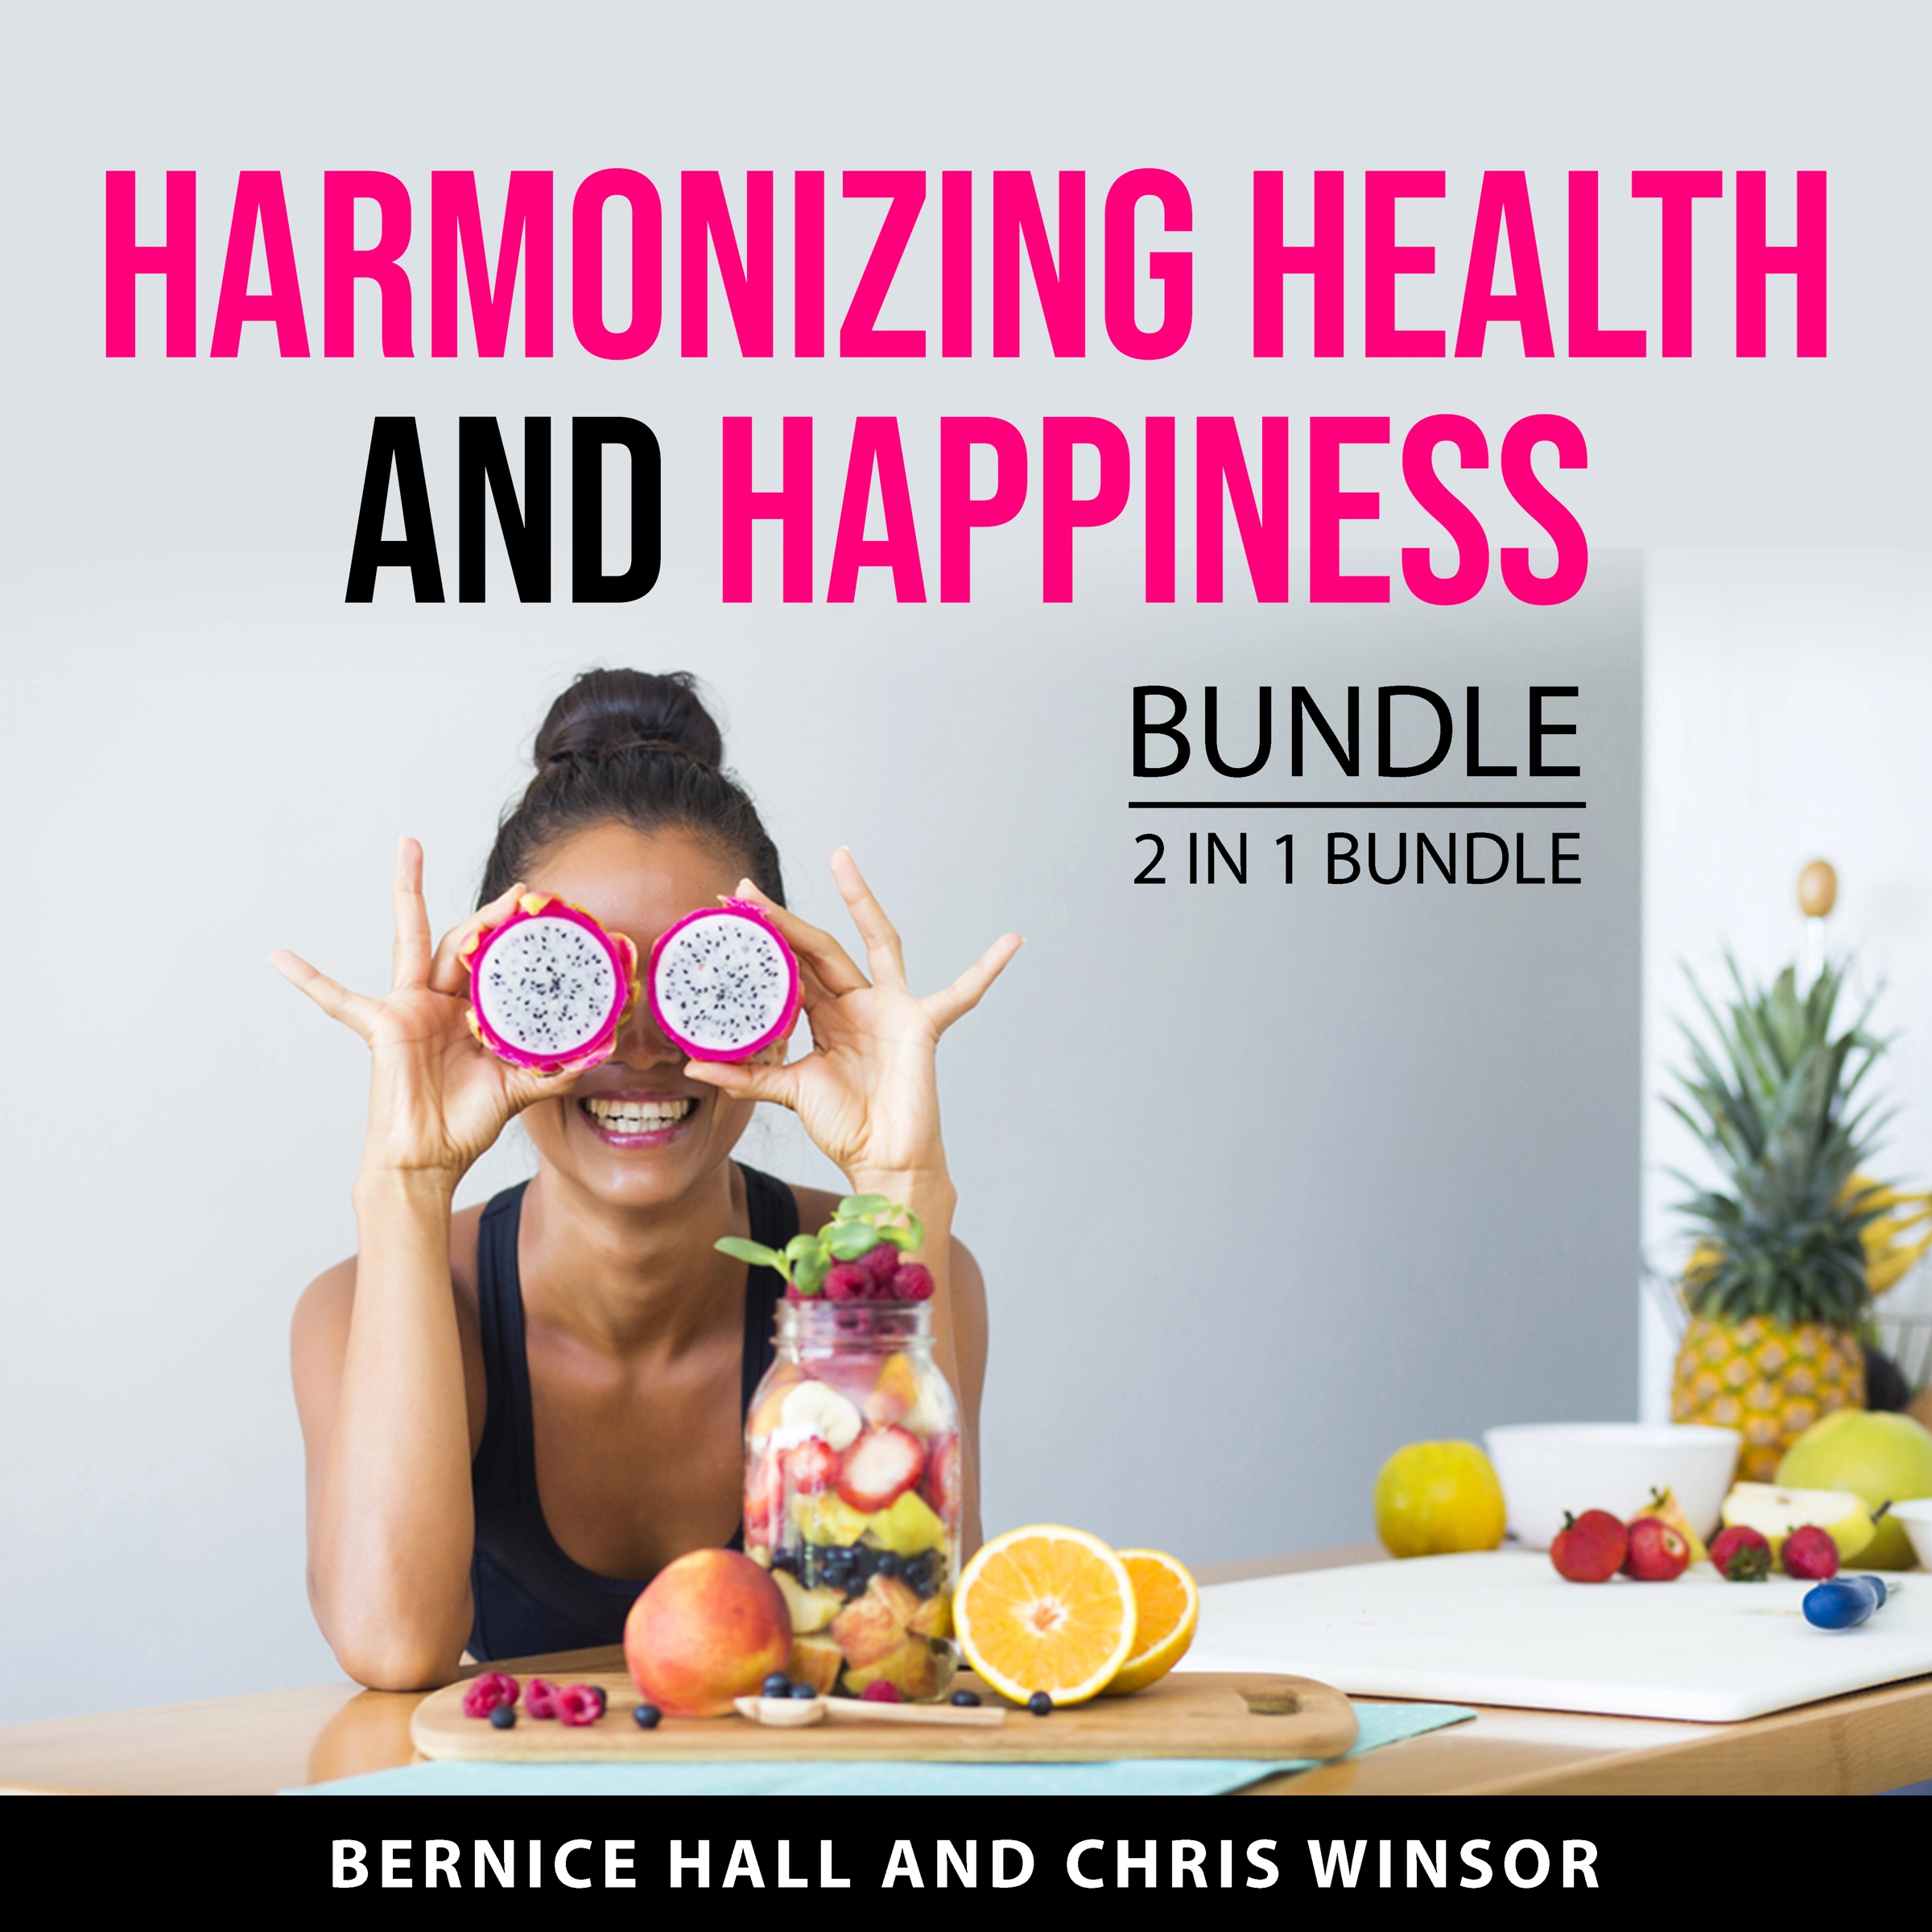 Harmonizing Health and Happiness Bundle, 2 in 1 Bundle Audiobook by Chris Winsor